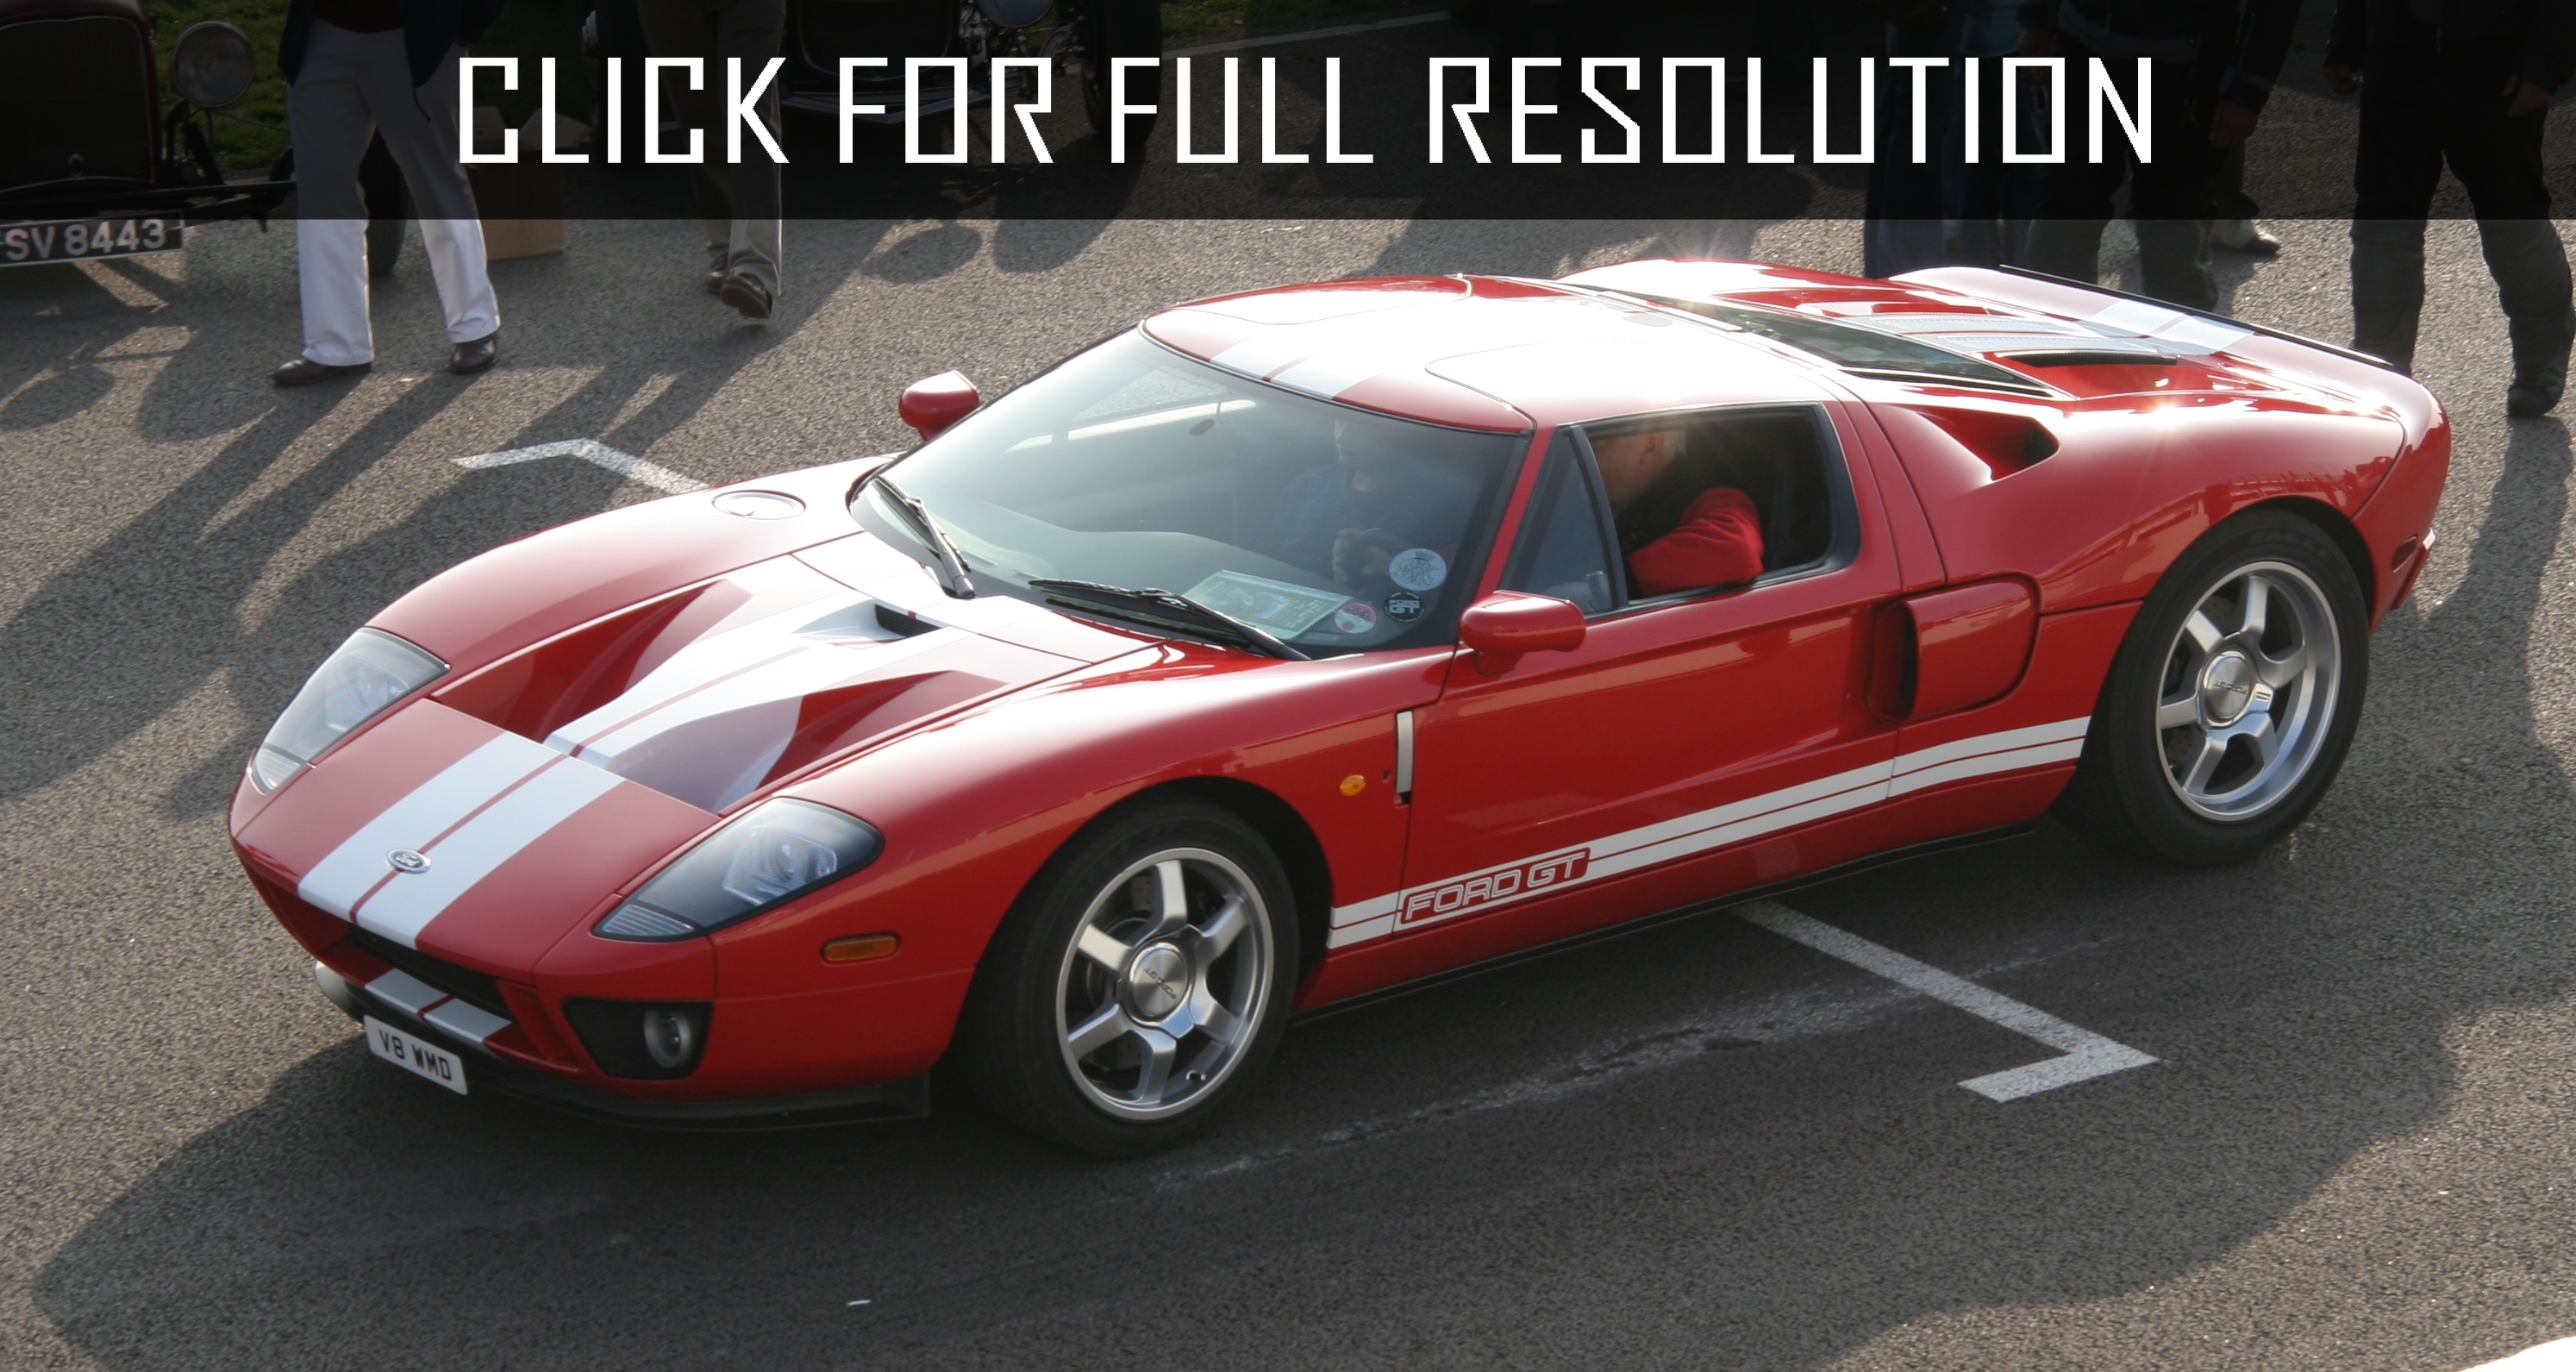 2008 Ford Gt